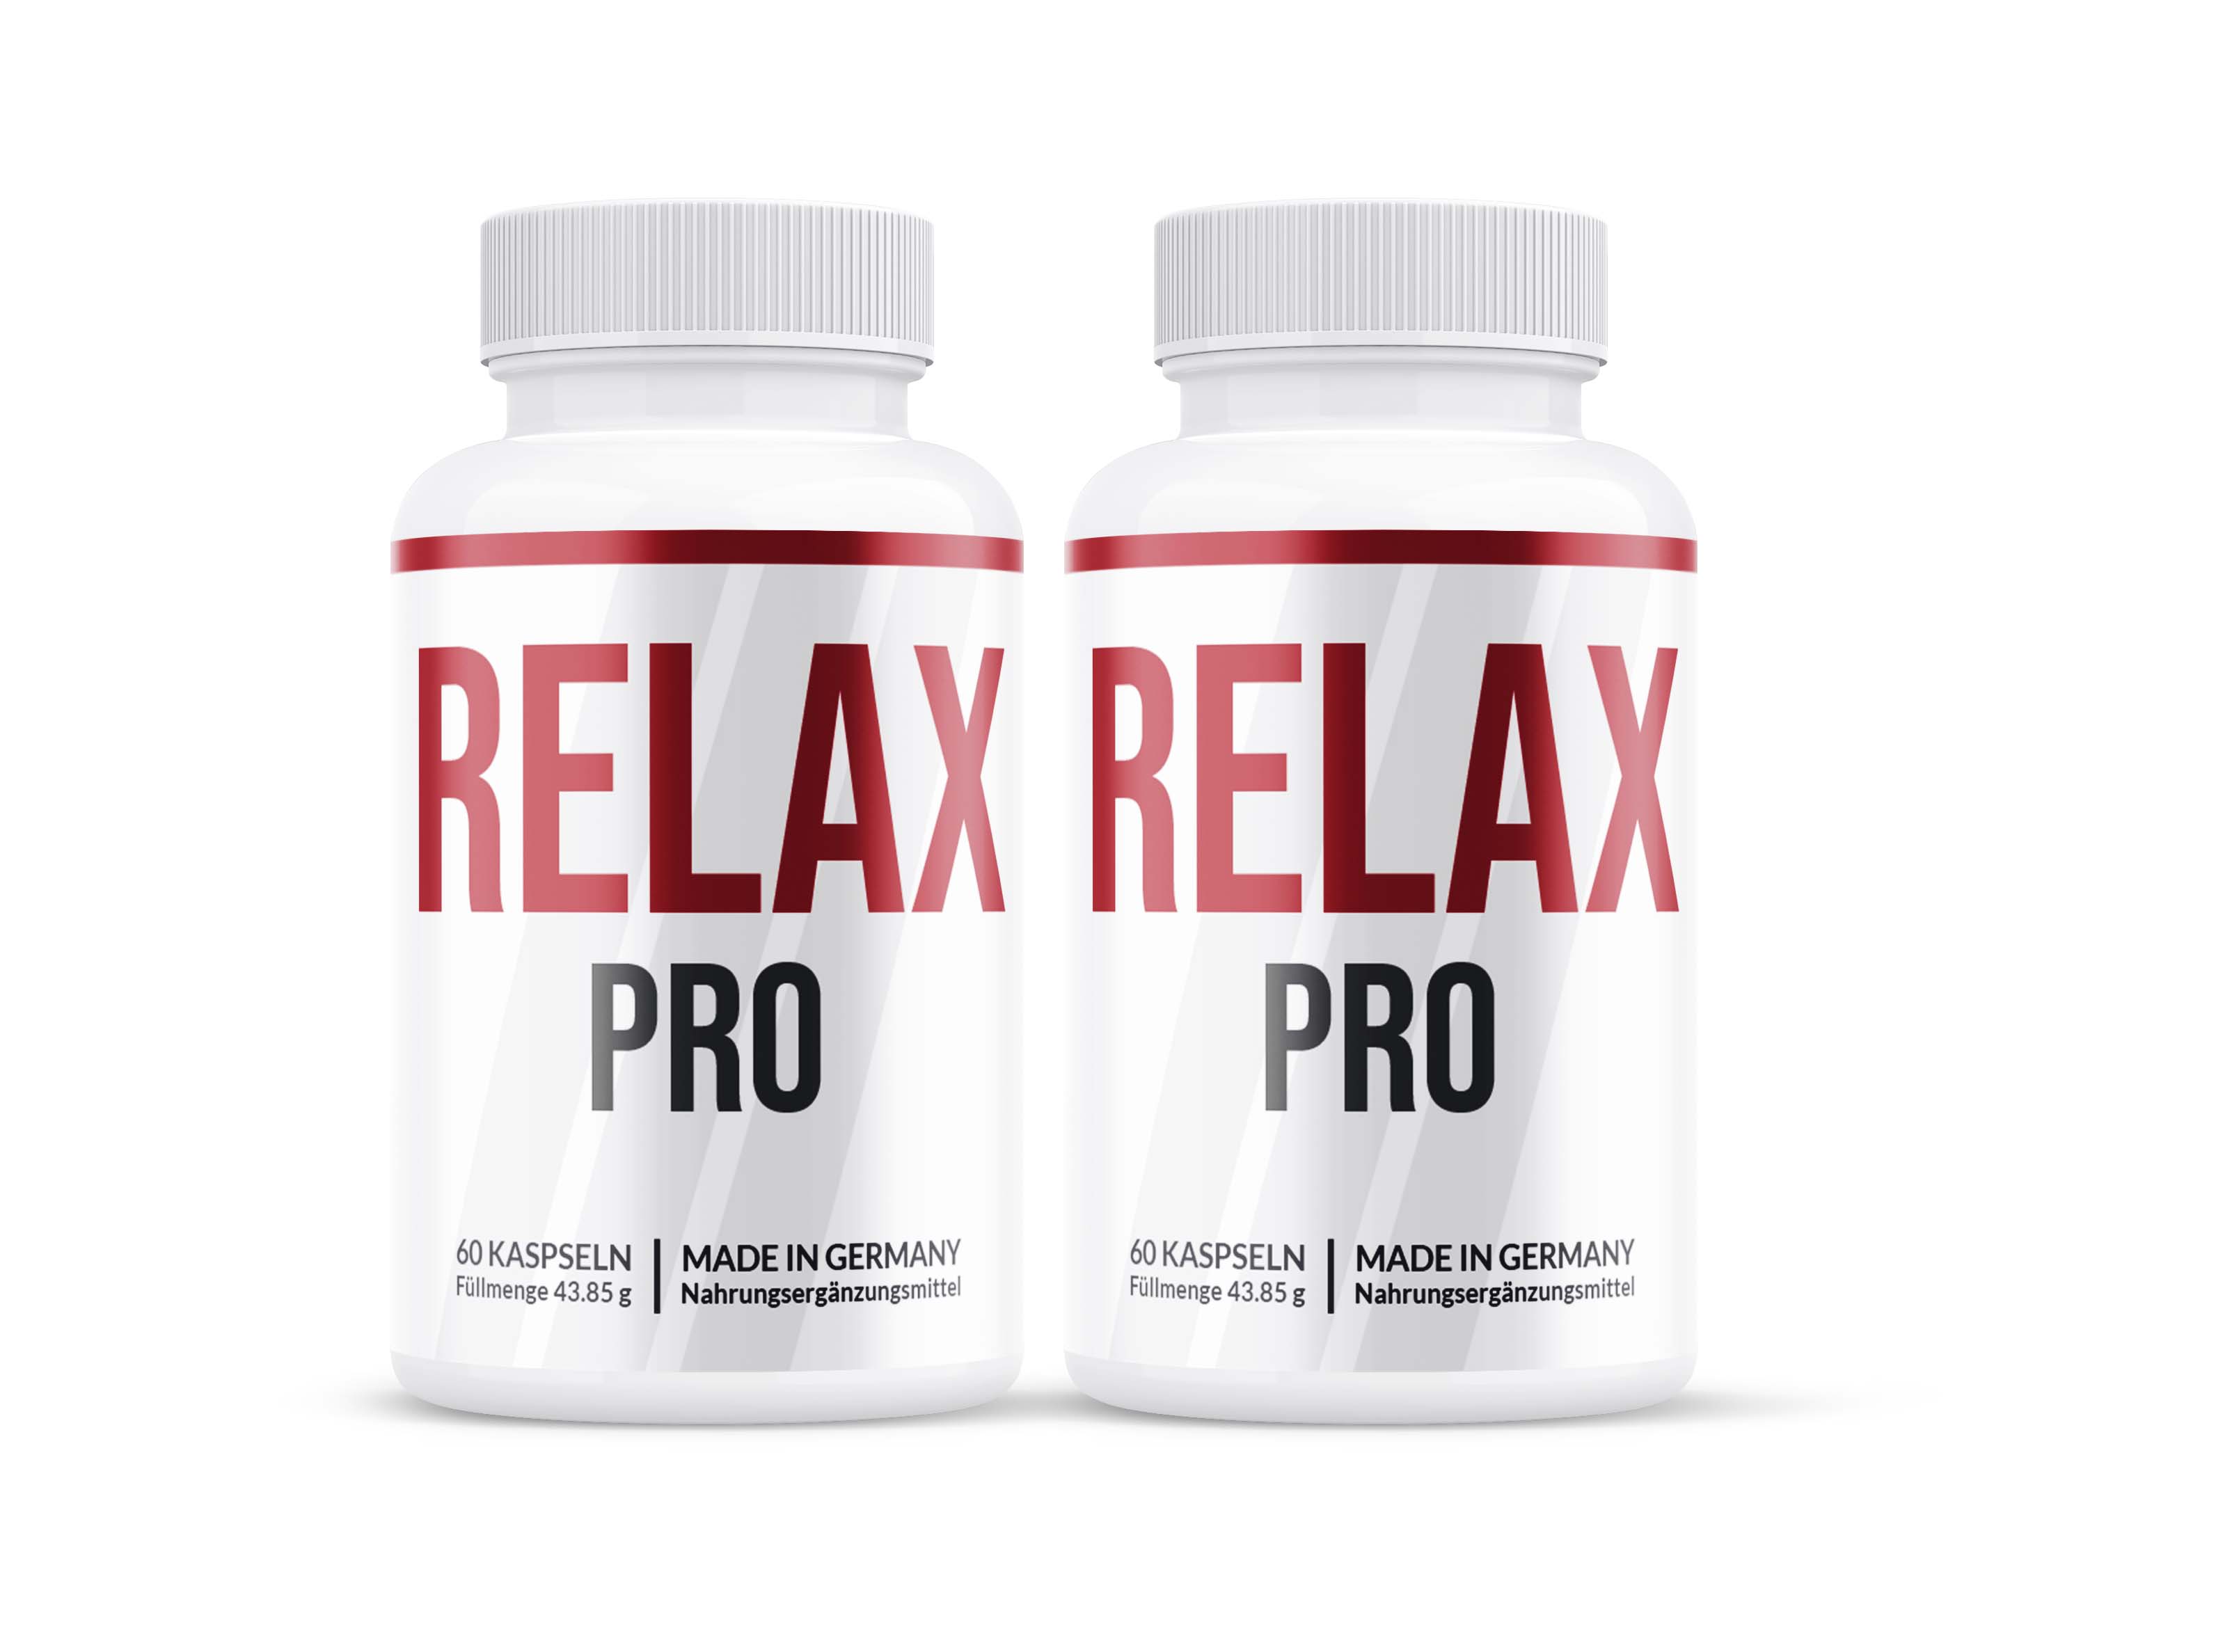 RELAX PRO